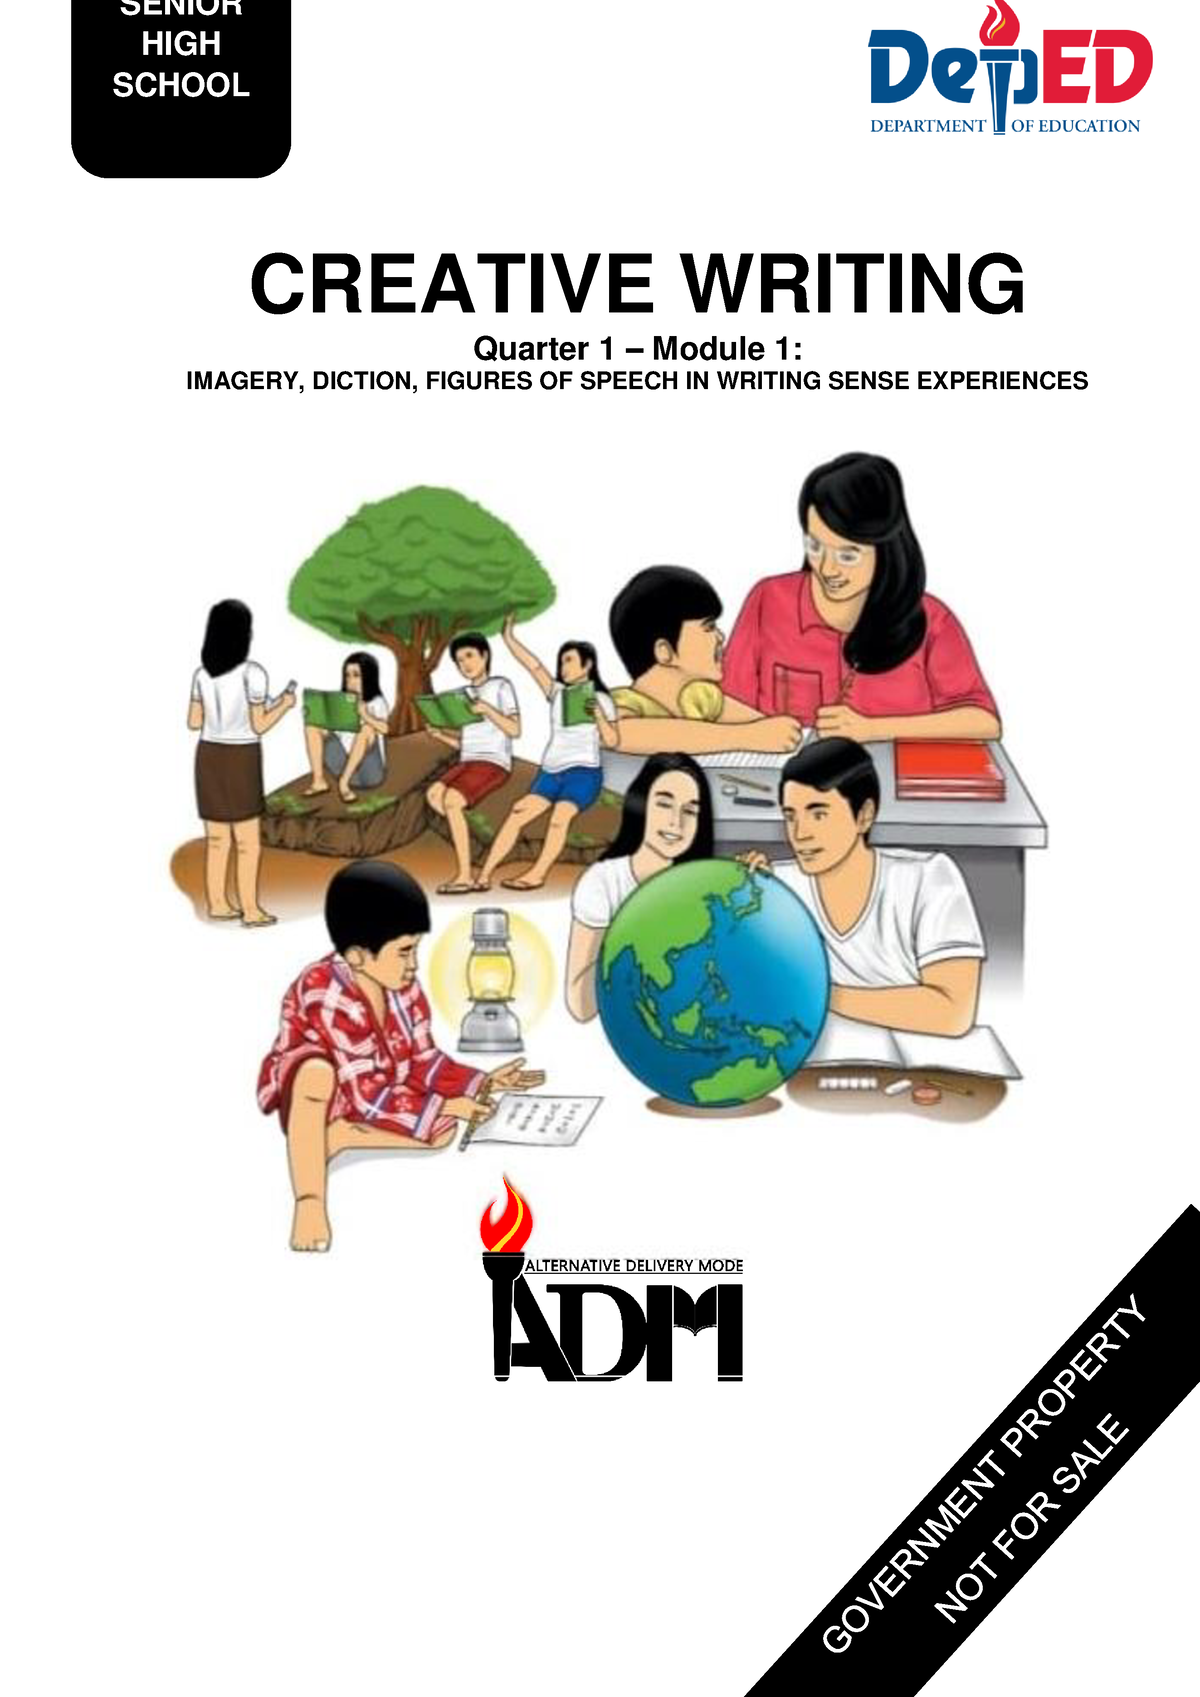 introduction to creative writing module